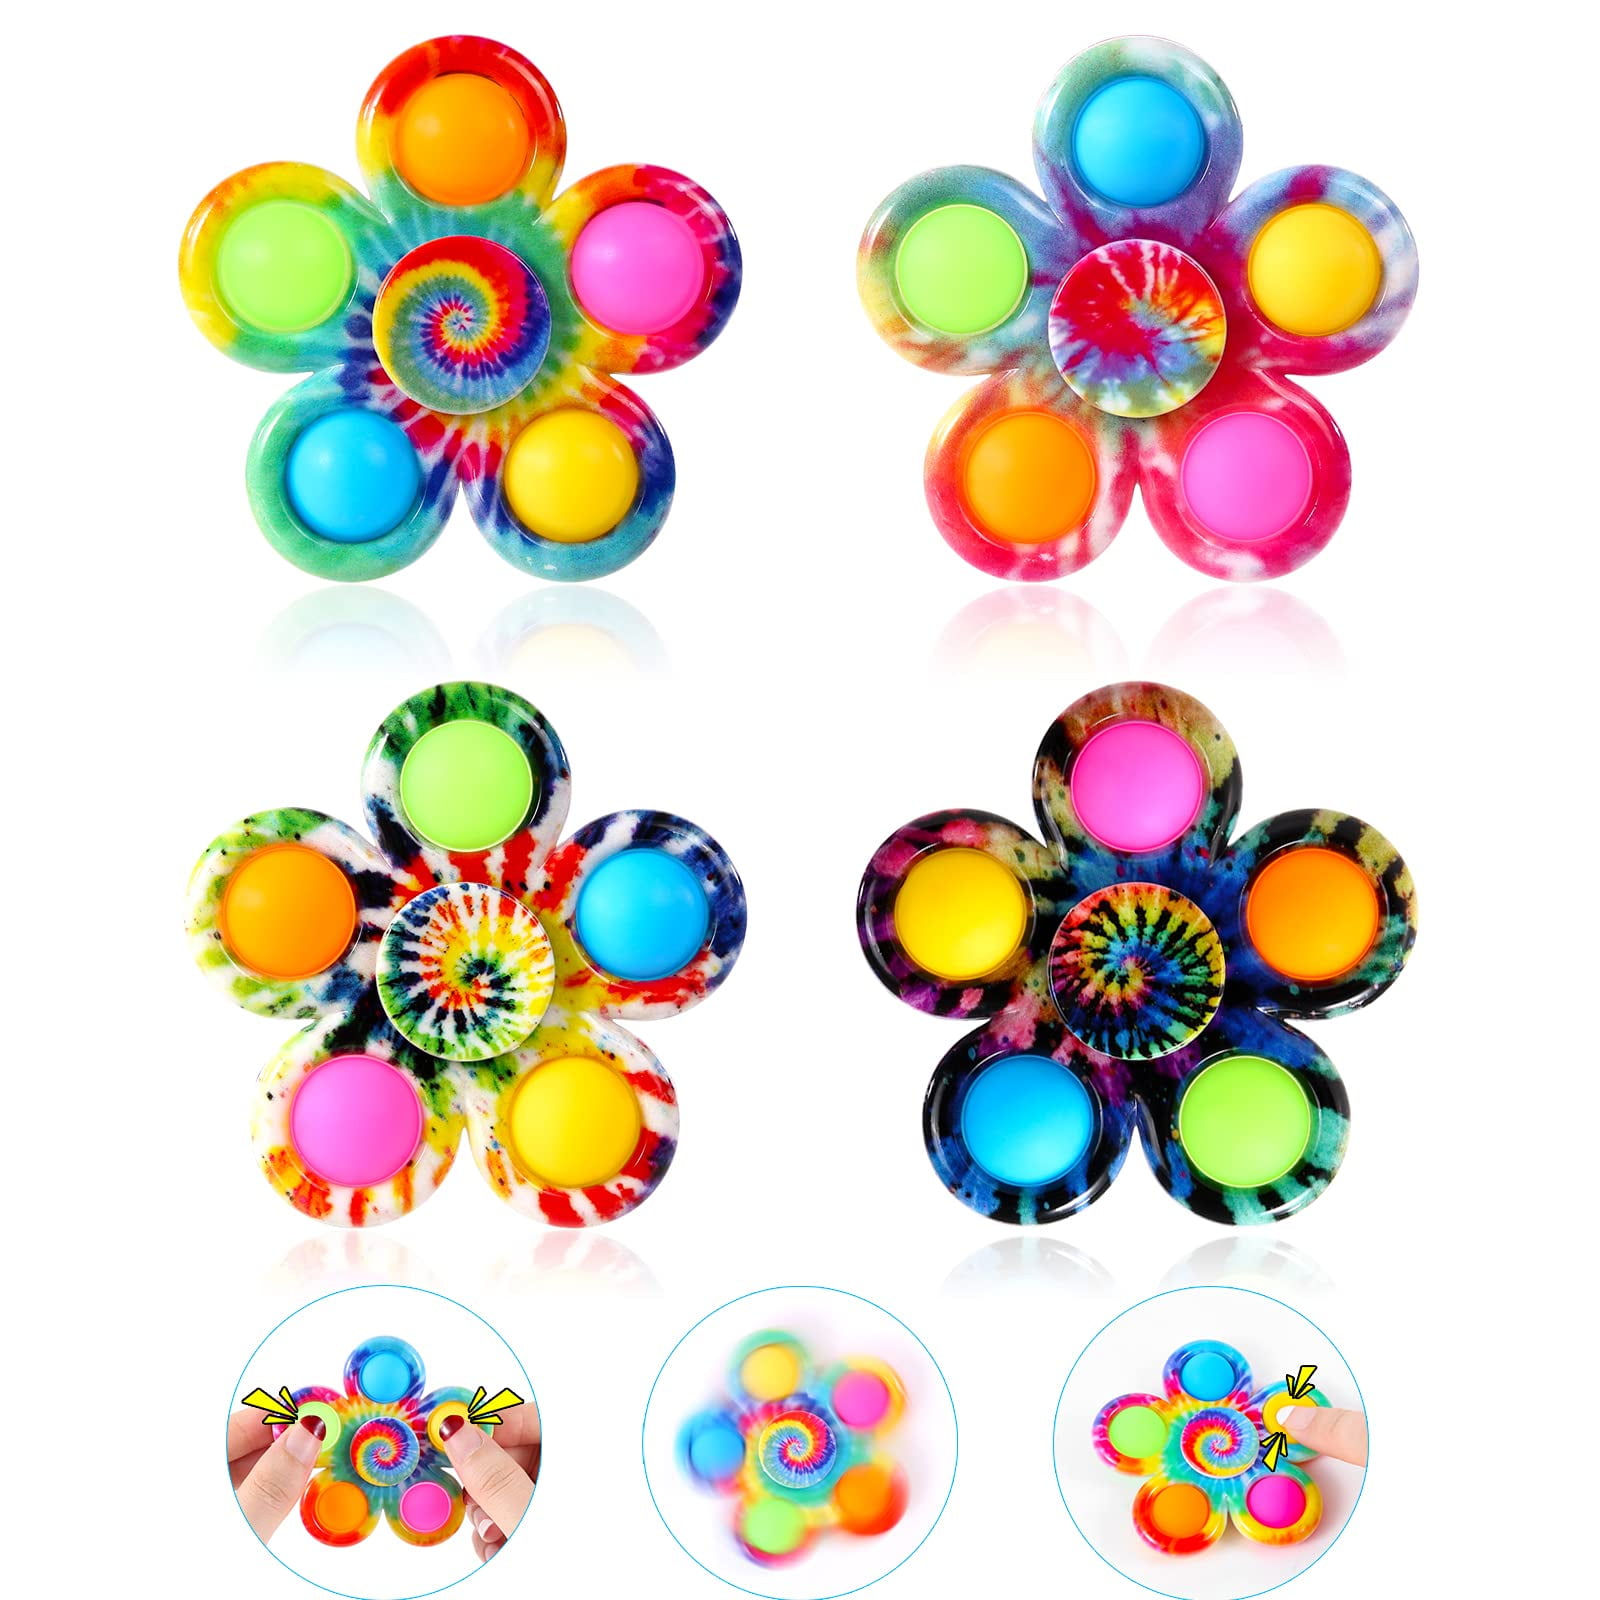 Simple Dimple Pop Push It Bubble Sensory Autism Toy ADHD Stress Relief Spinner 